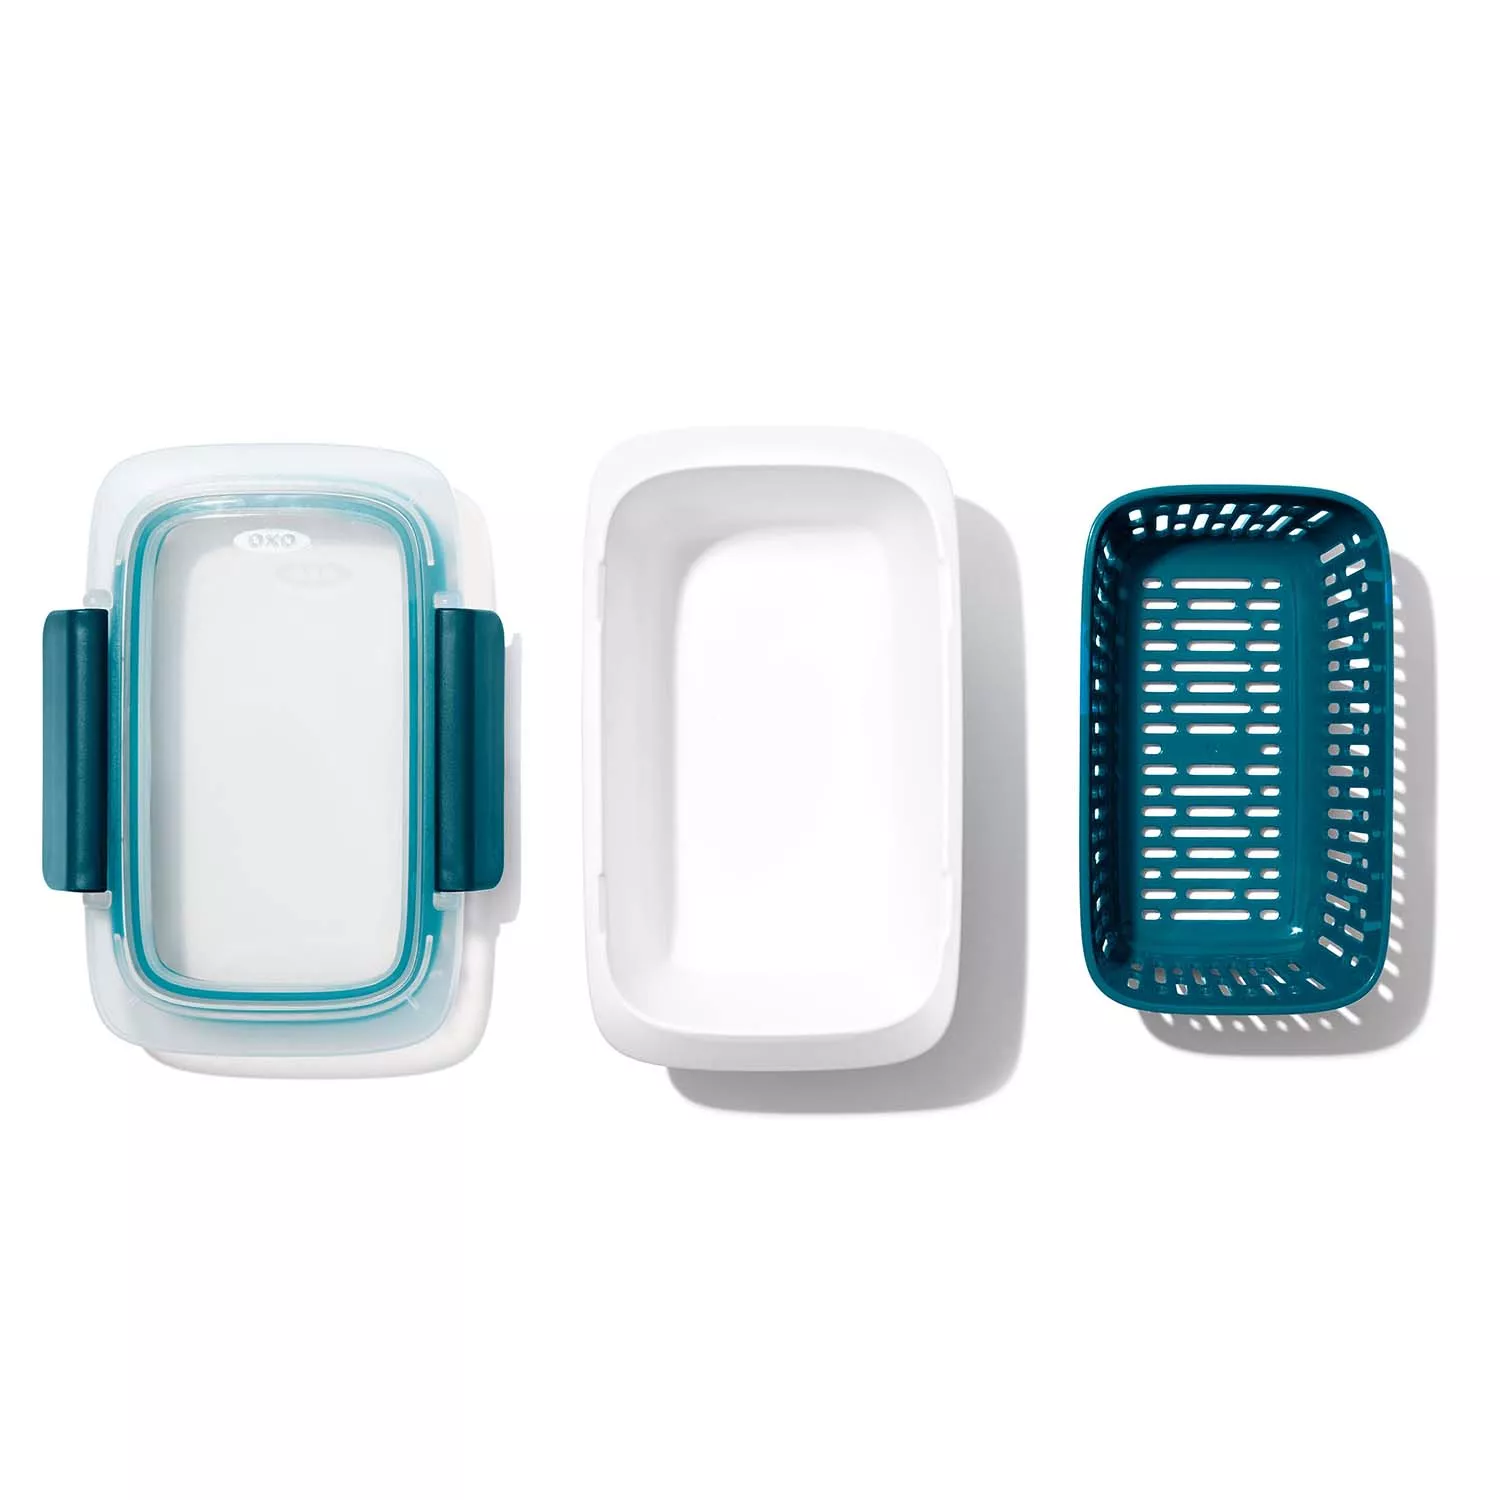 OXO Good Grips Prep & Go Containers